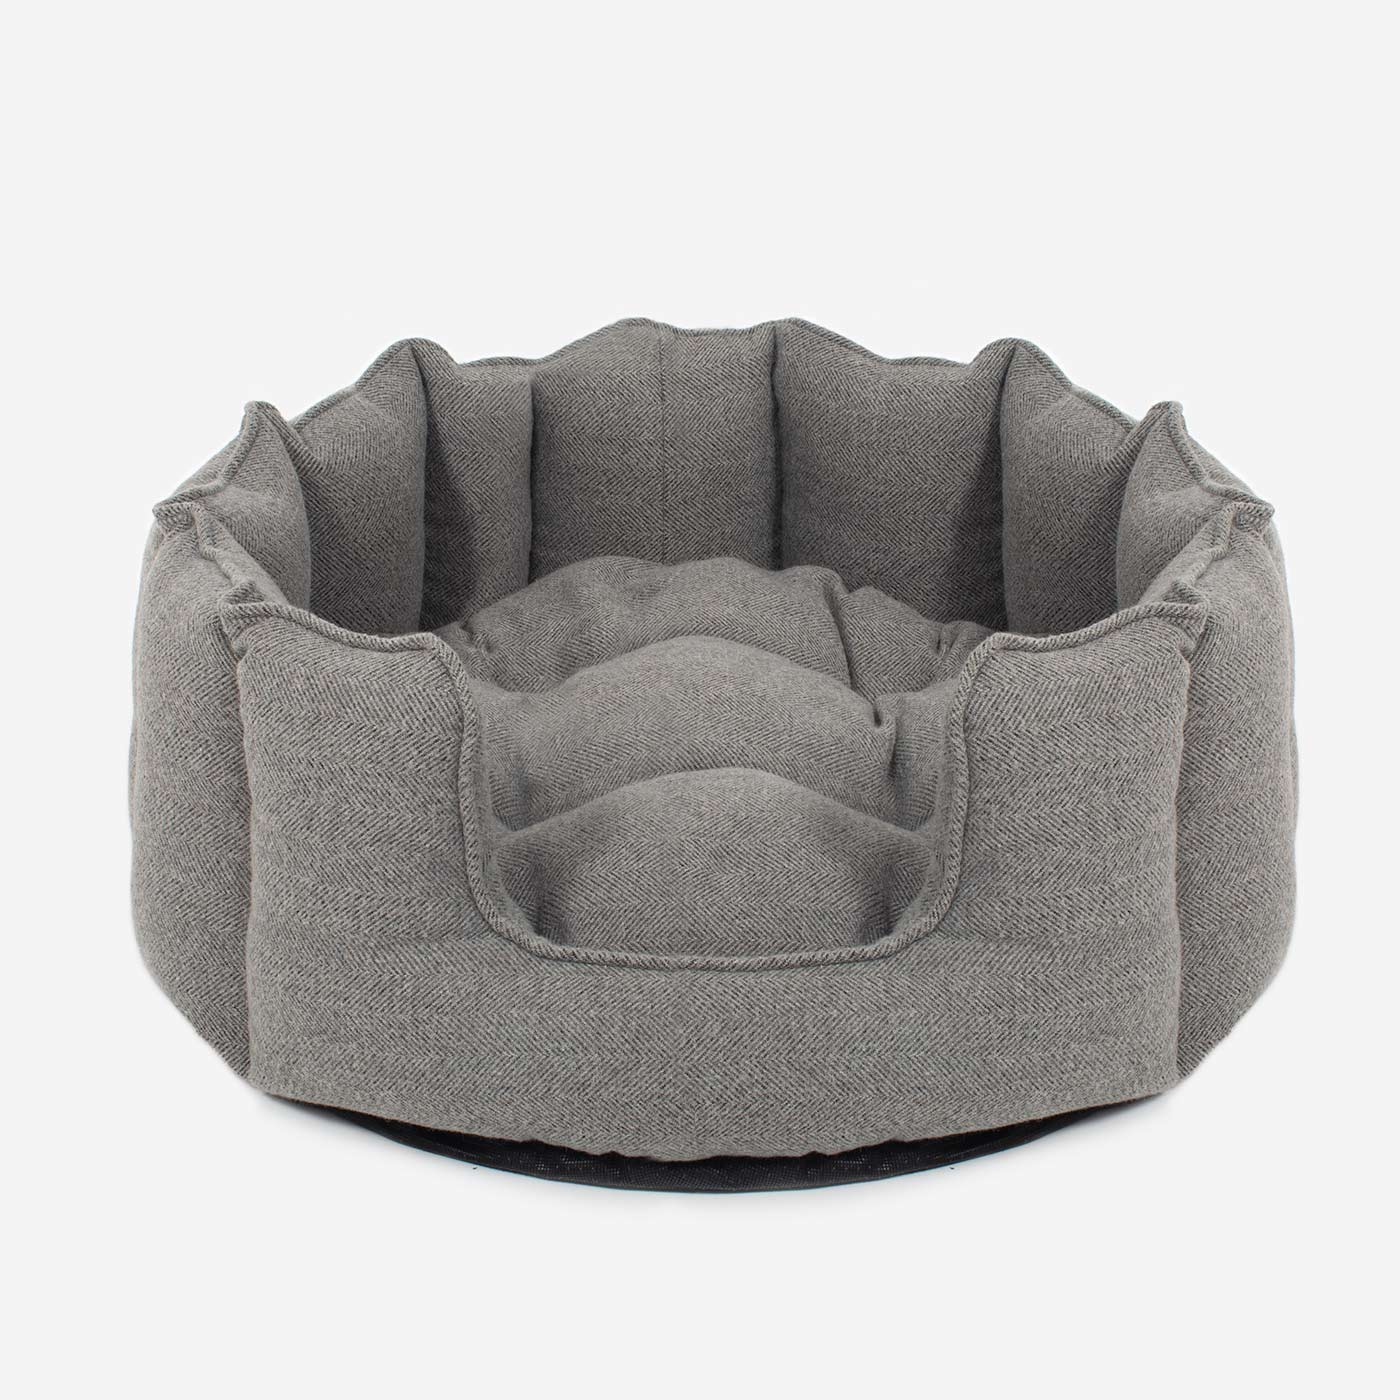 Discover Our Luxurious High Wall Bed For Cats, Featuring inner pillow with plush teddy fleece on one side To Craft The Perfect Cat Bed In Stunning Pewter Herringbone Tweed! Available To Personalise Now at Lords & Labradors    